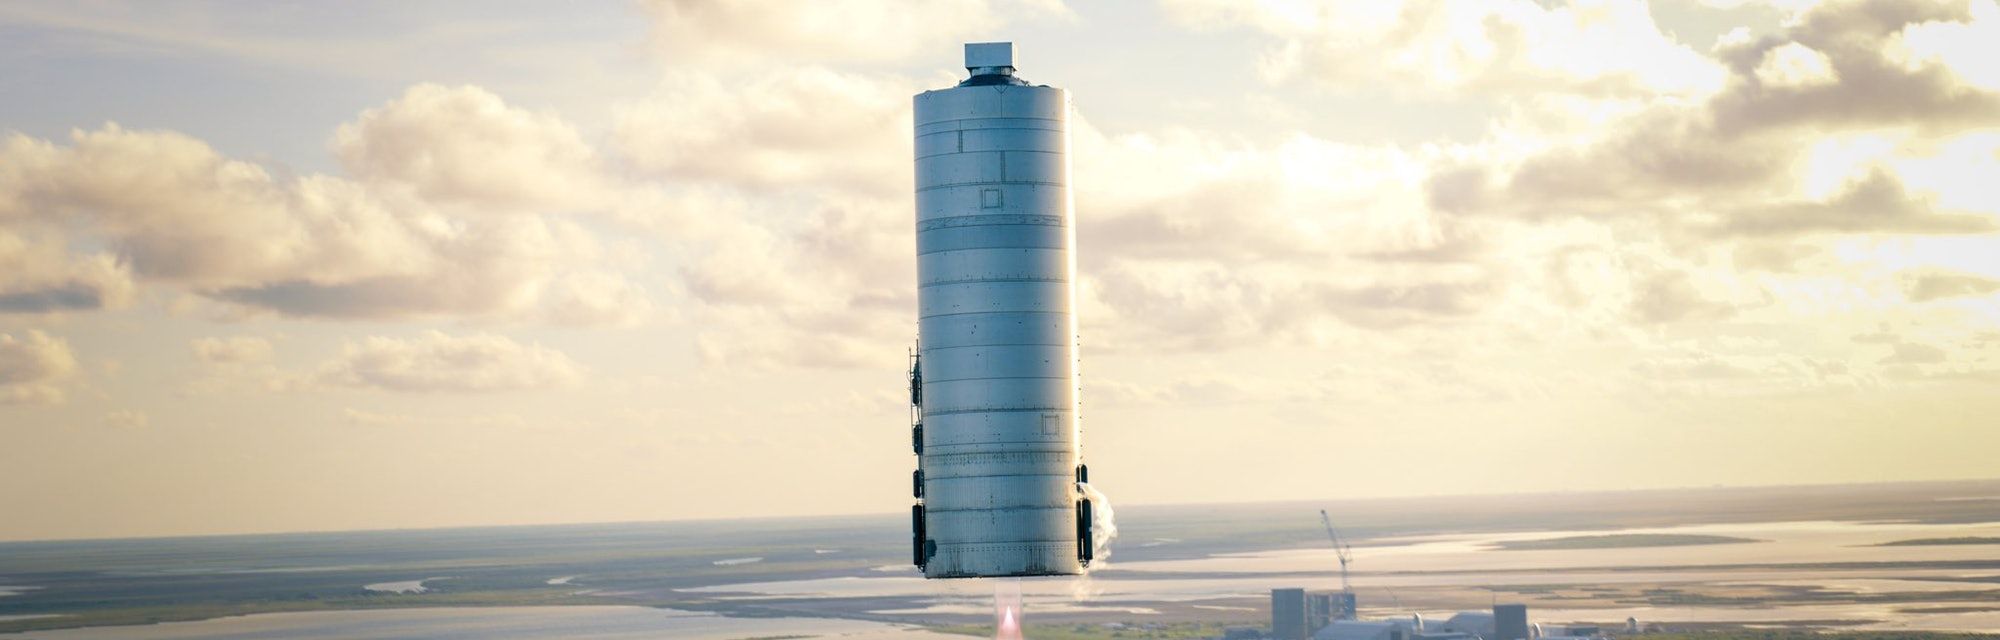 SpaceX Starship: Jaw Dropping Image Capture The Shiny Prototype In Flight